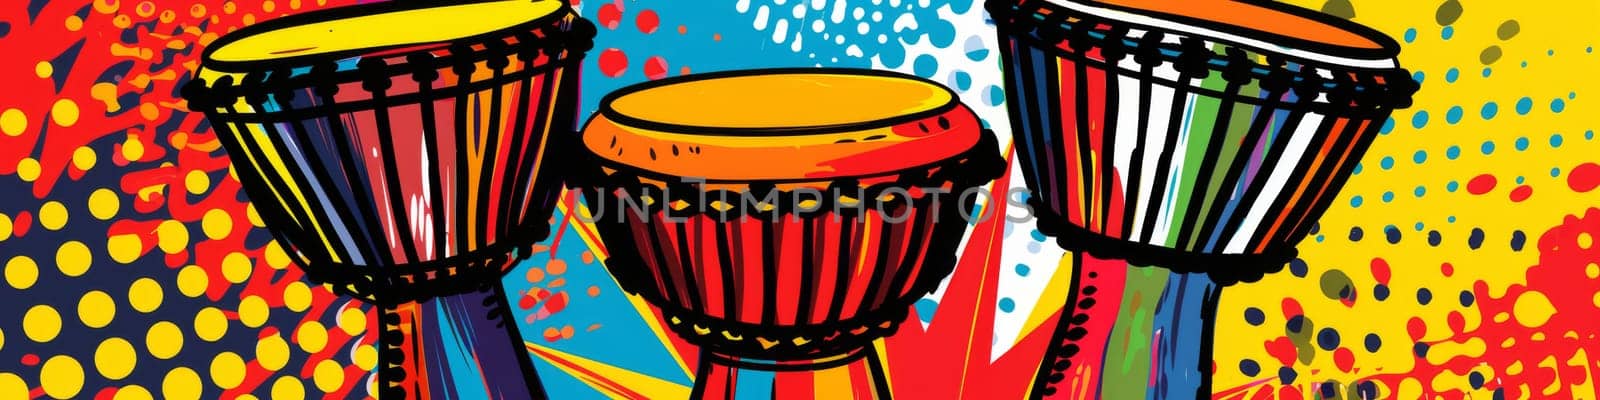 Djembe drums in row as pop art style, musical instrument